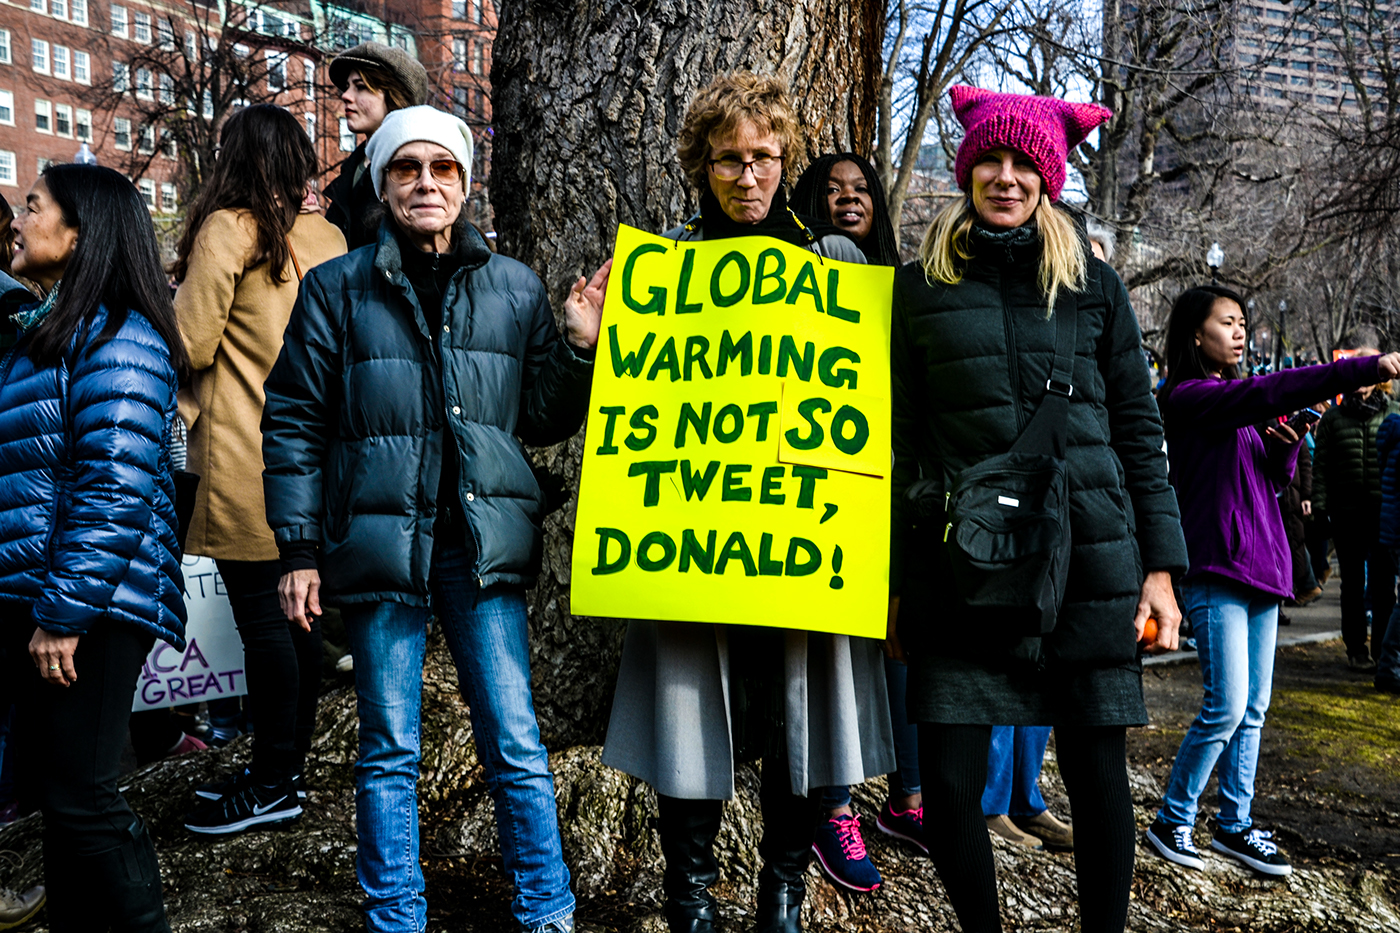 political protest signs anti-trump anti-racism equality community mobilization voices